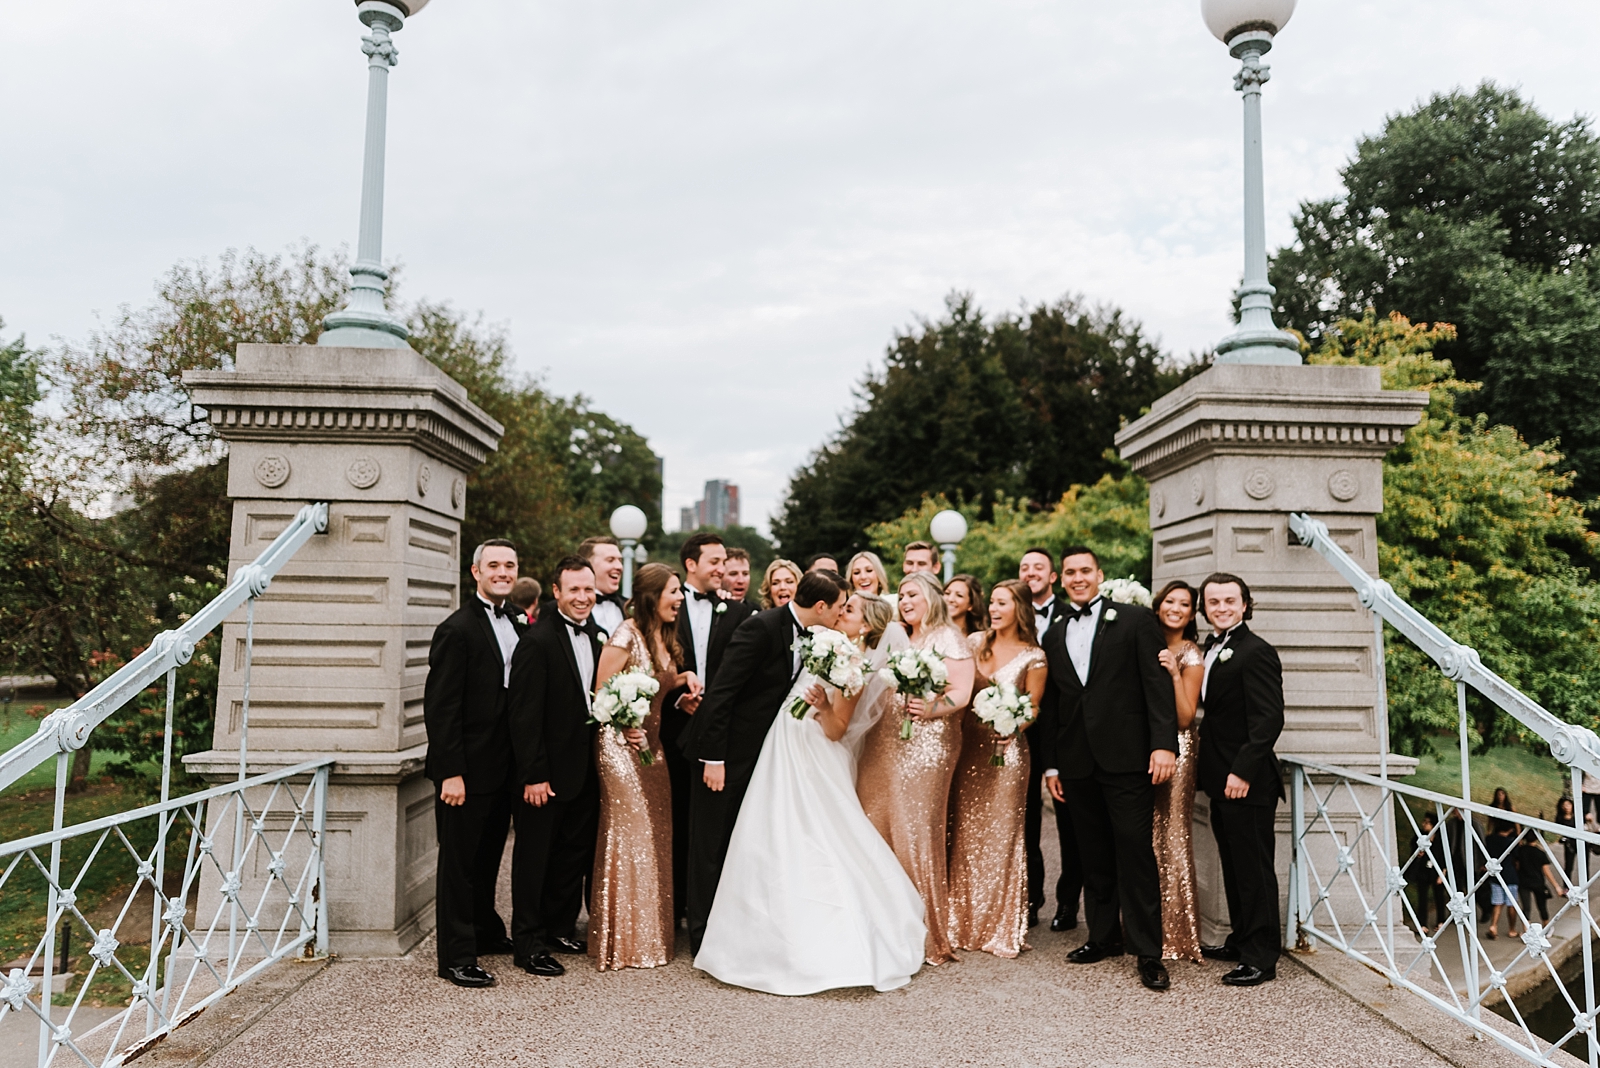 Romantic & Classic Wedding at St. Cecilia's Church & Omni Parker House by Boston Wedding Photographer Annmarie Swift